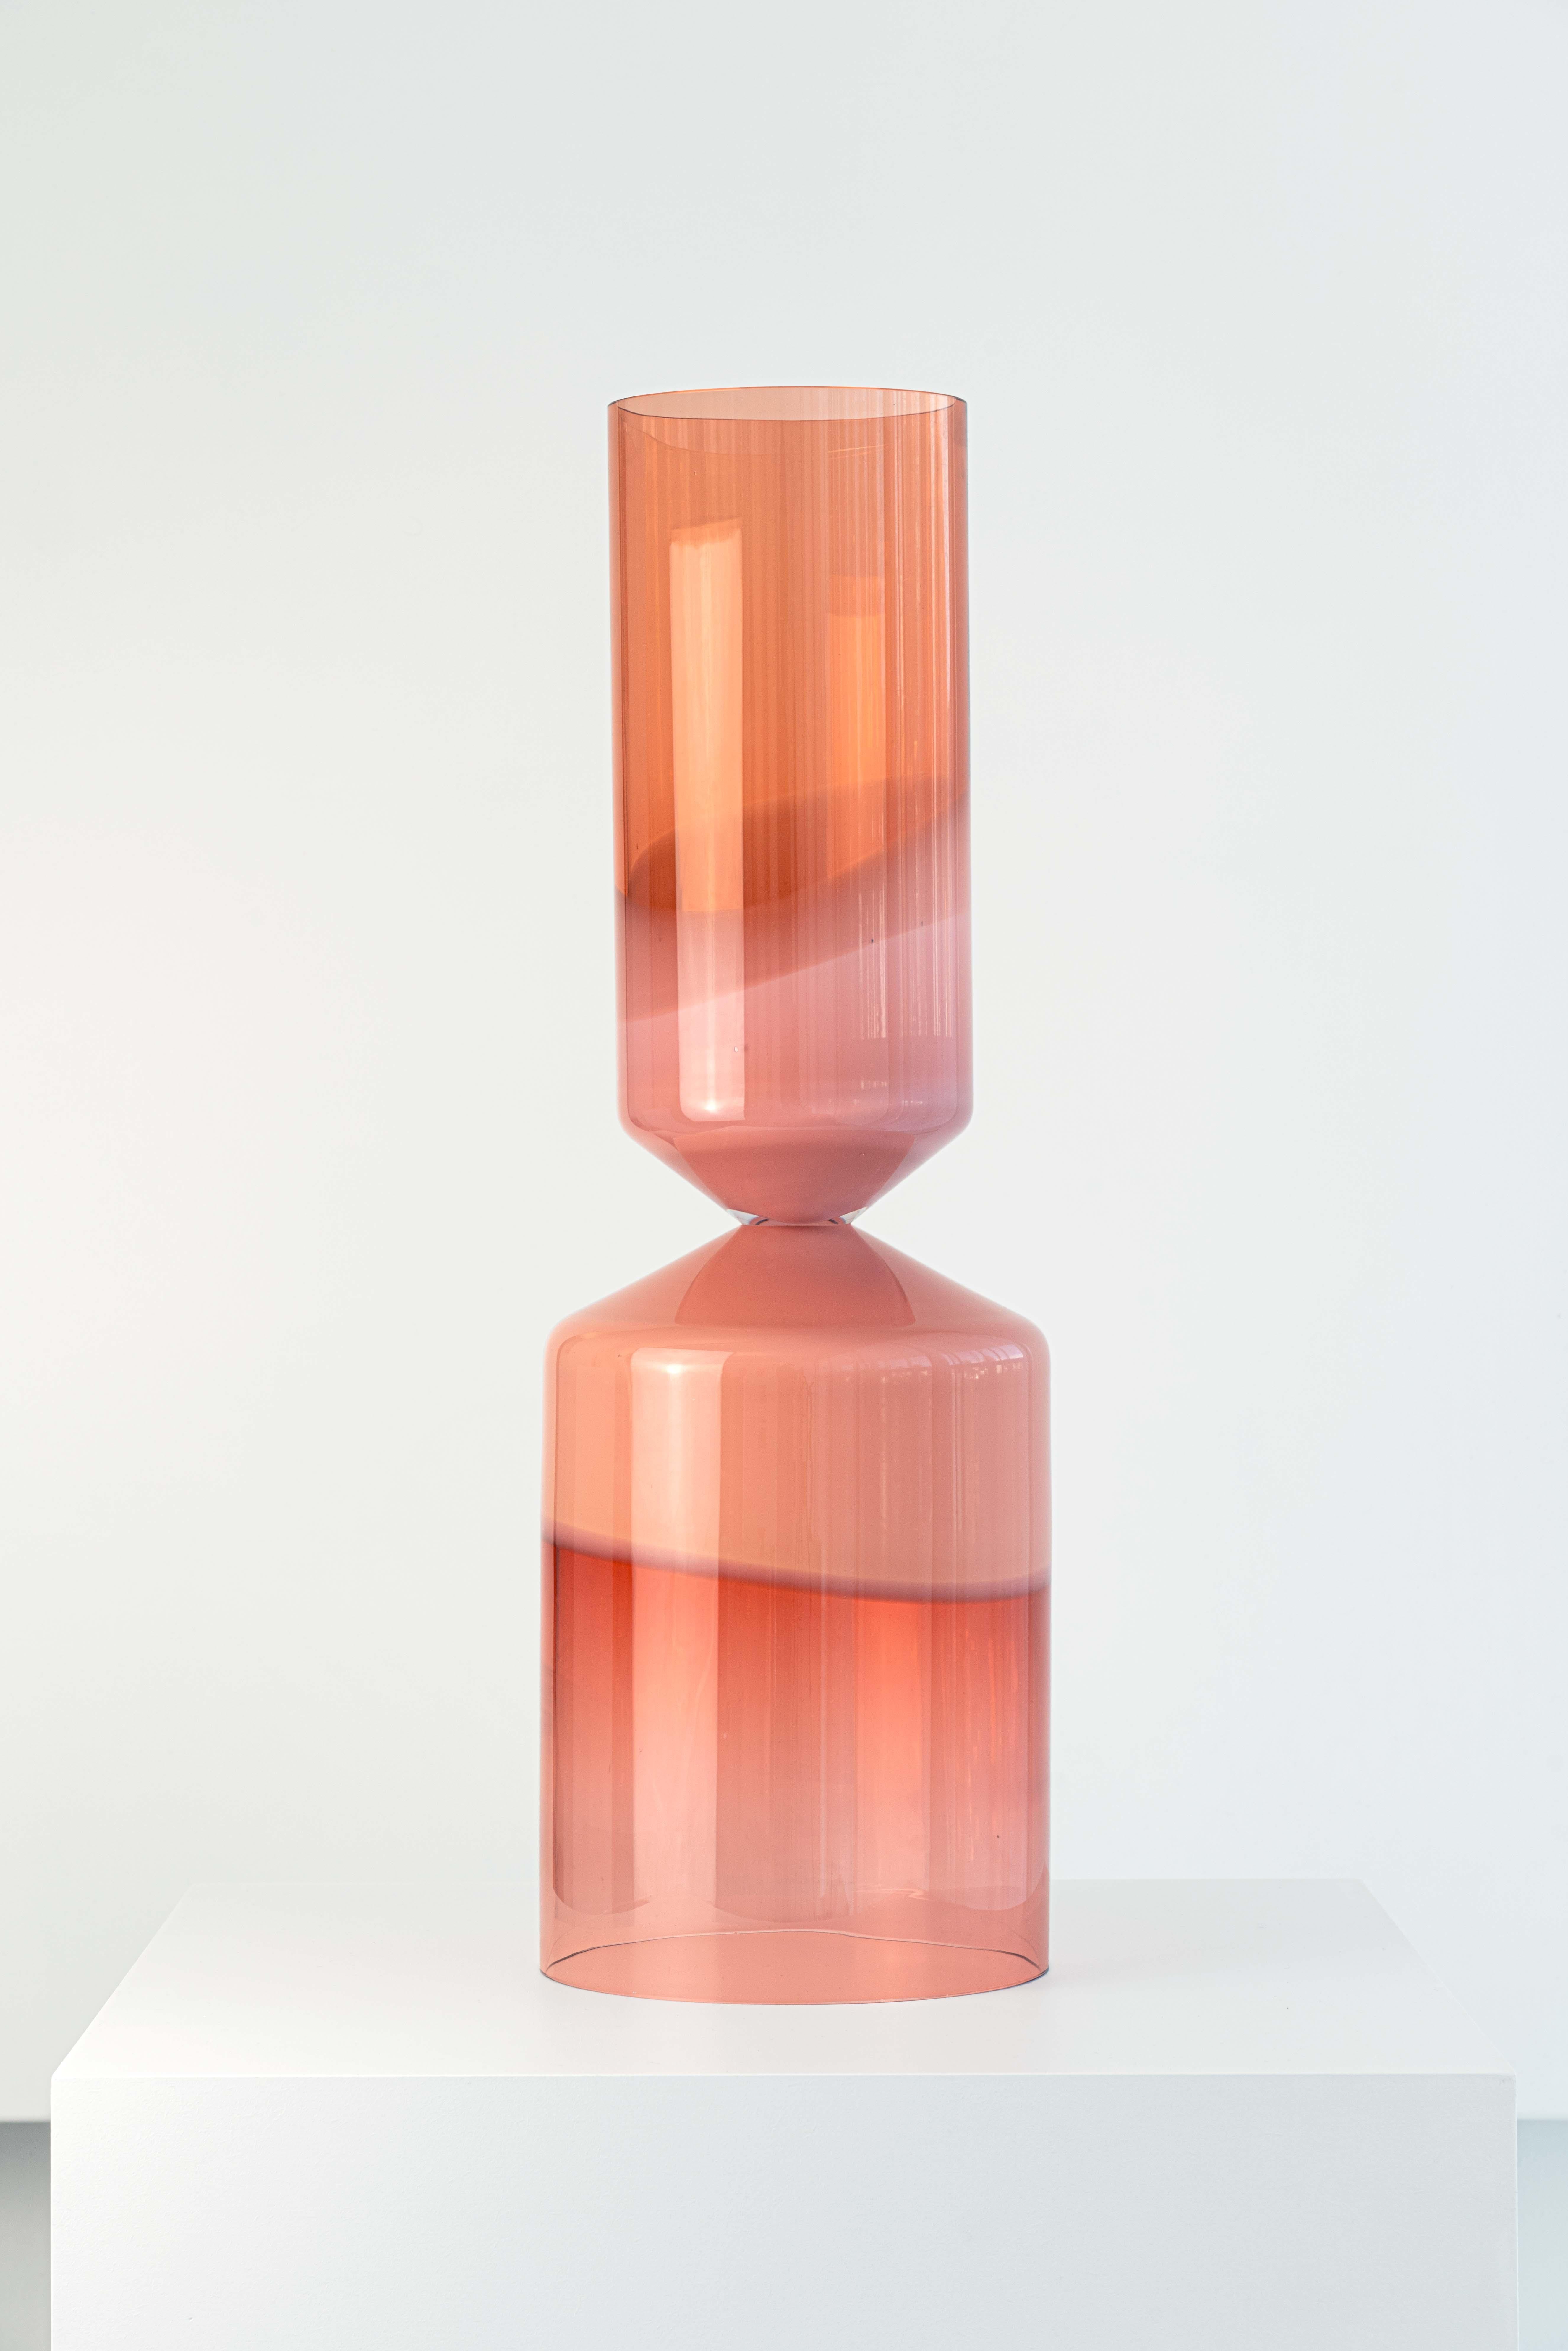 The collection of Rotterdam based designer Selma Hamstra was launched during Milan Design Week 2021. 'Her Masters Voice' collection contains glass designs that are created to question the craft. Searching for a balance between the skills of a master